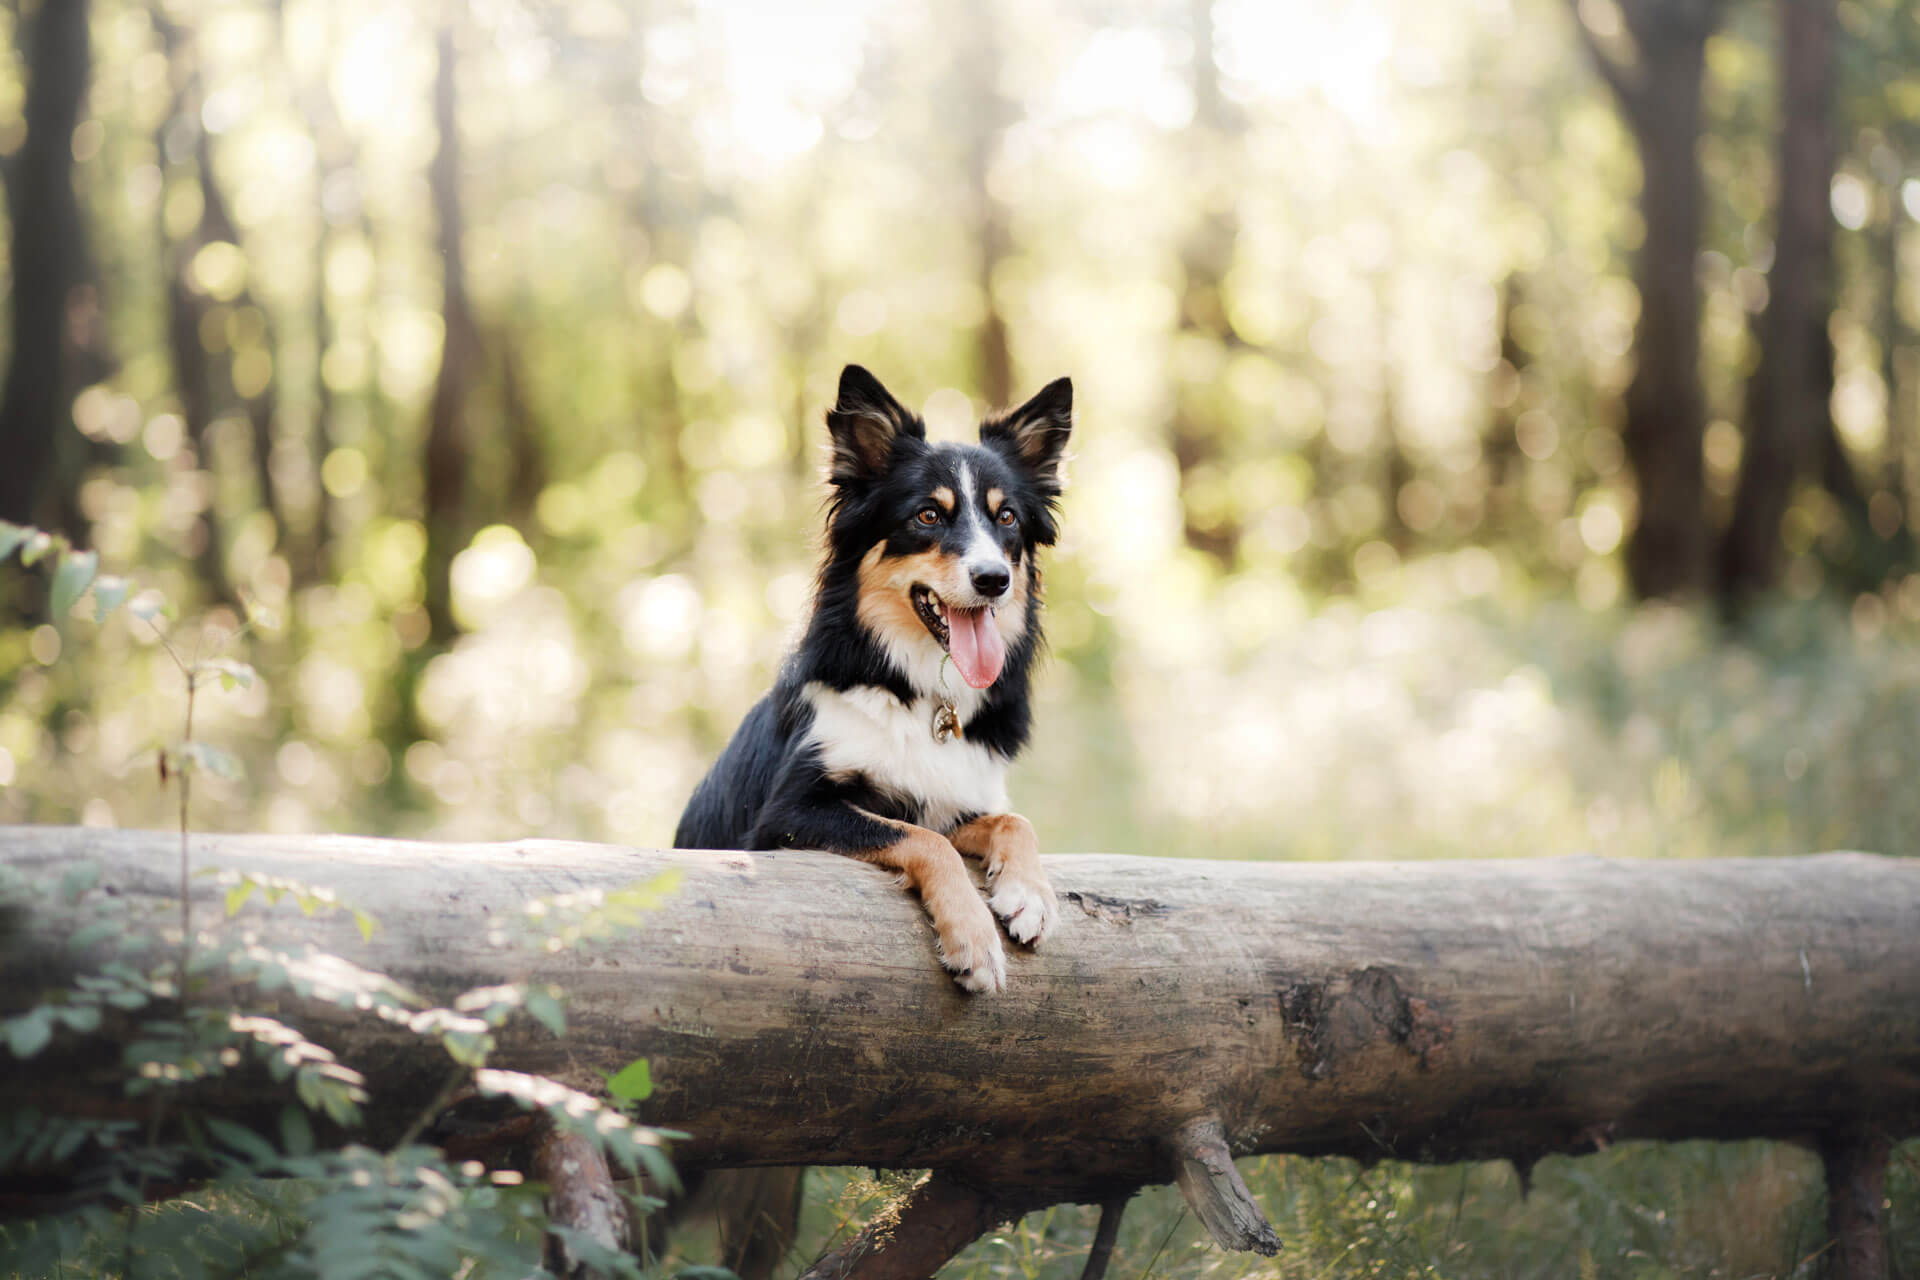 dog in forest standing over a log